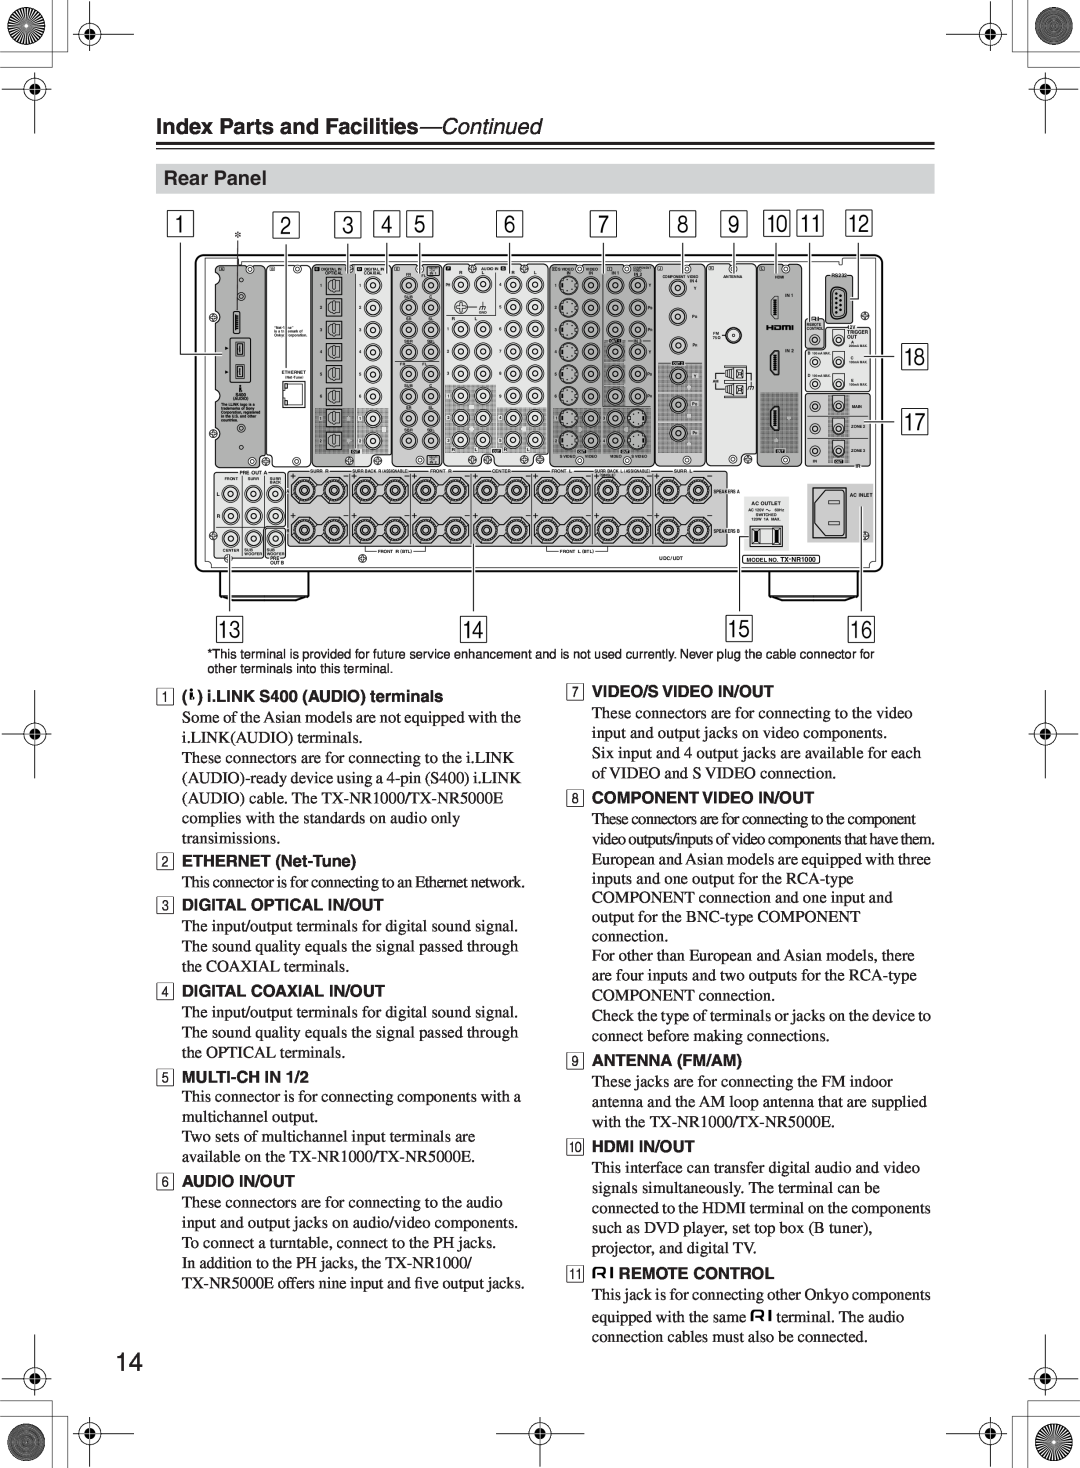 Onkyo TX-NR1000 instruction manual Rear Panel, Index Parts and Facilities—Continued 